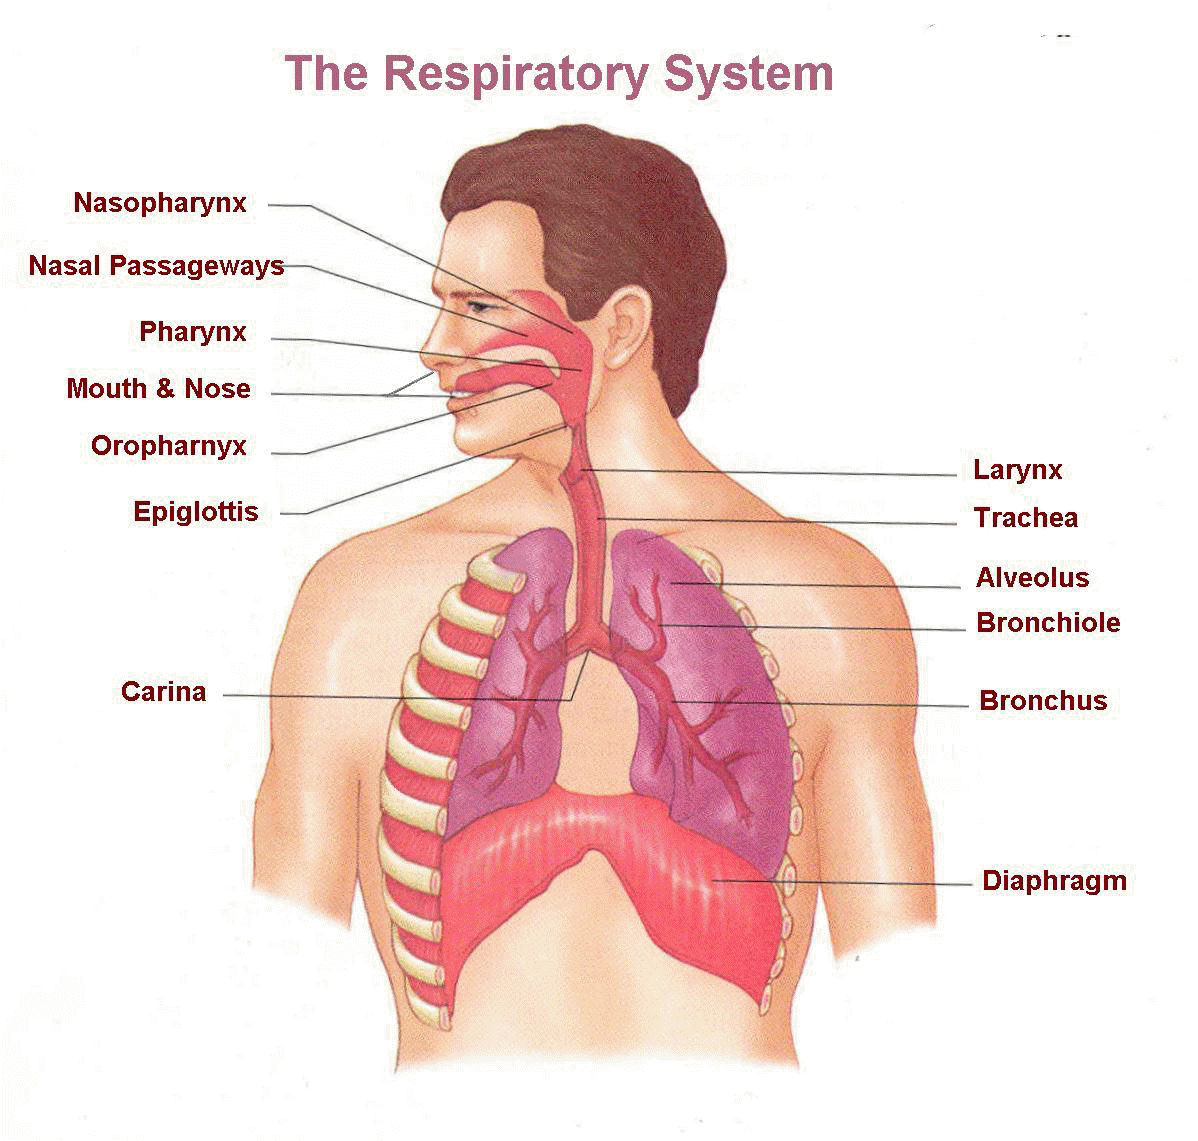 The respiratory system is a very important organ system to consider in patients with chest pain (source)